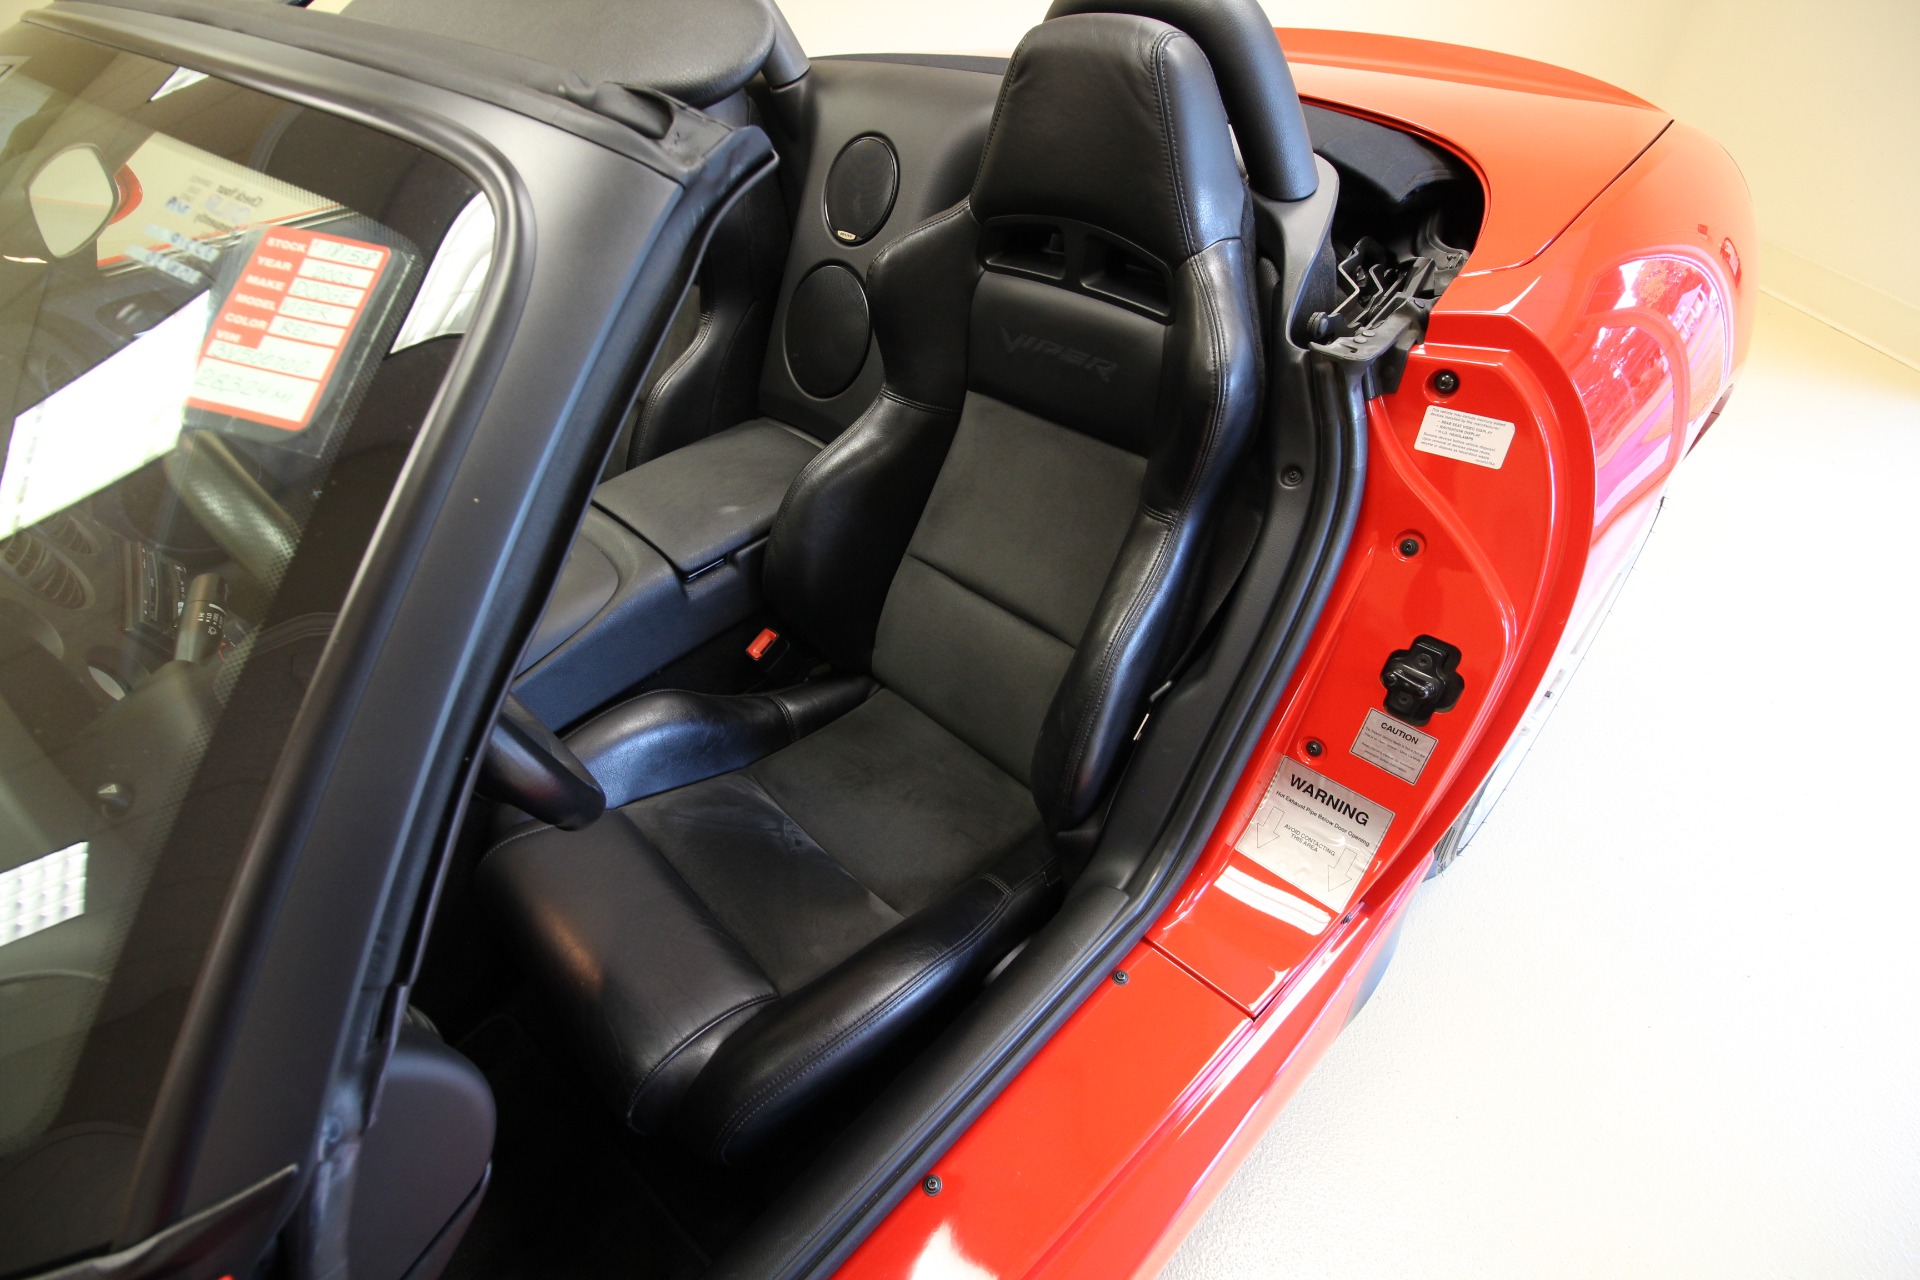 Used 2003 Viper Red with Black Soft Top Dodge Viper SRT-10 | Albany, NY